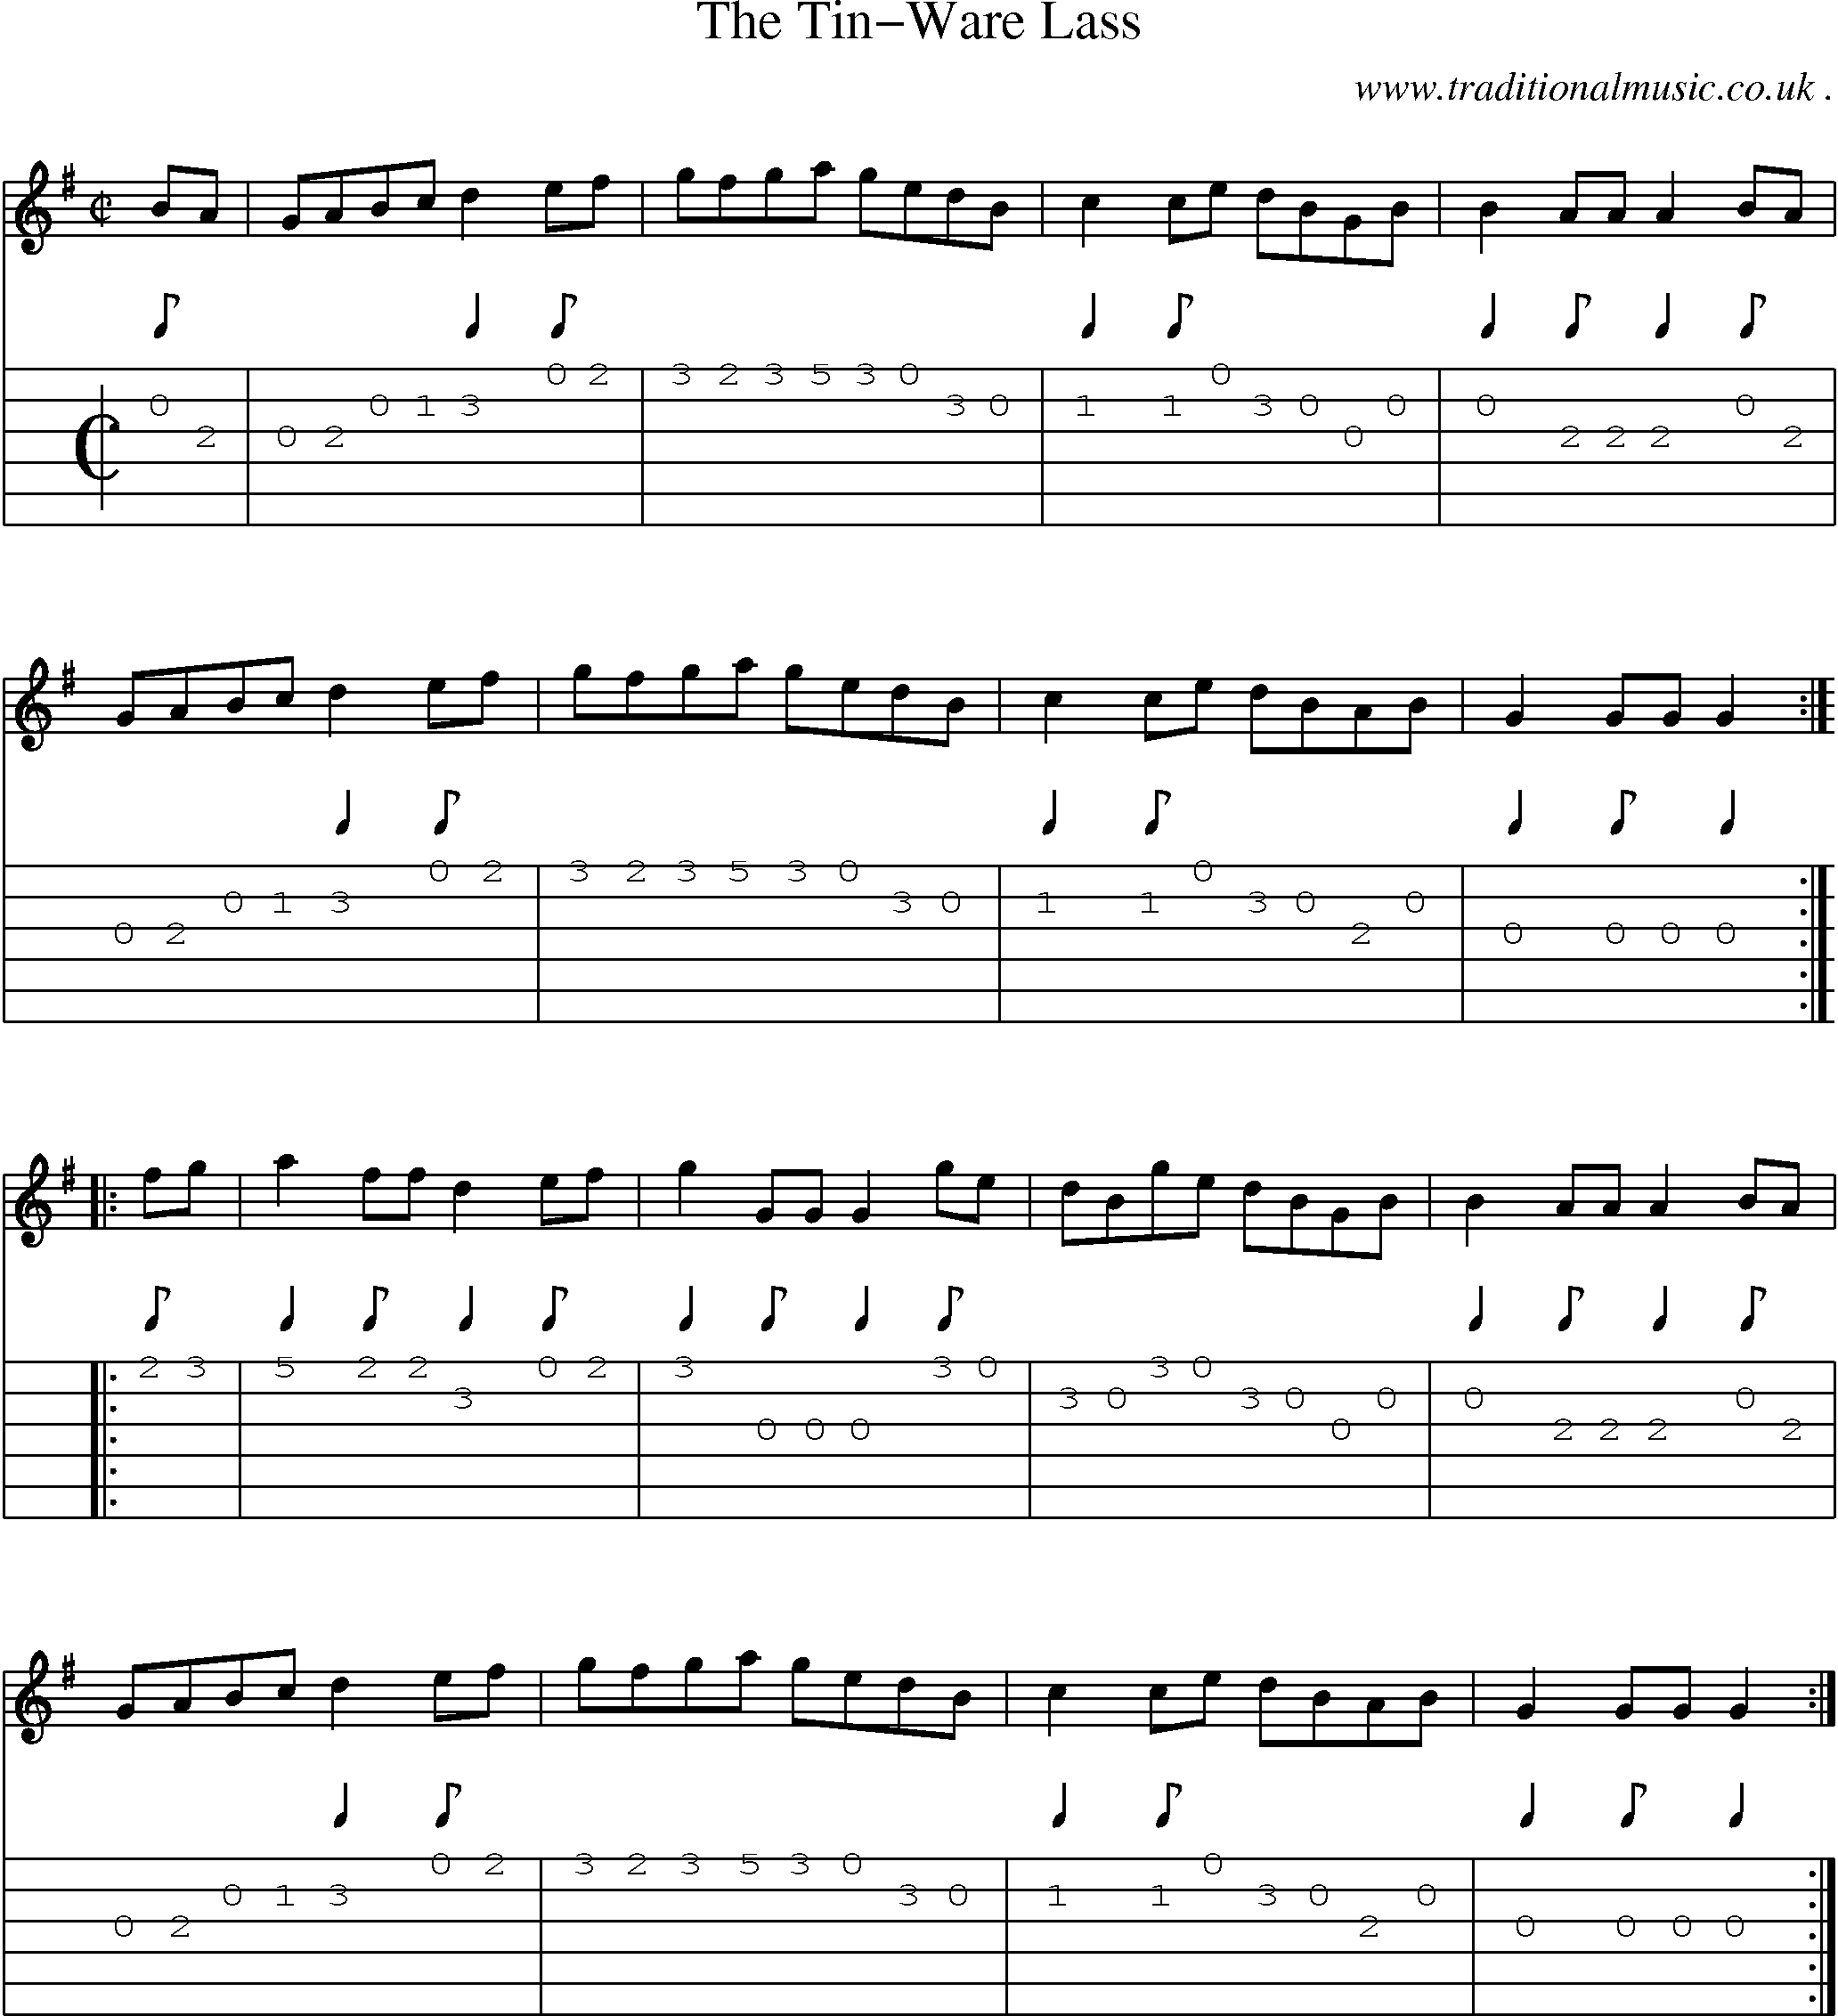 Sheet-Music and Guitar Tabs for The Tin-ware Lass